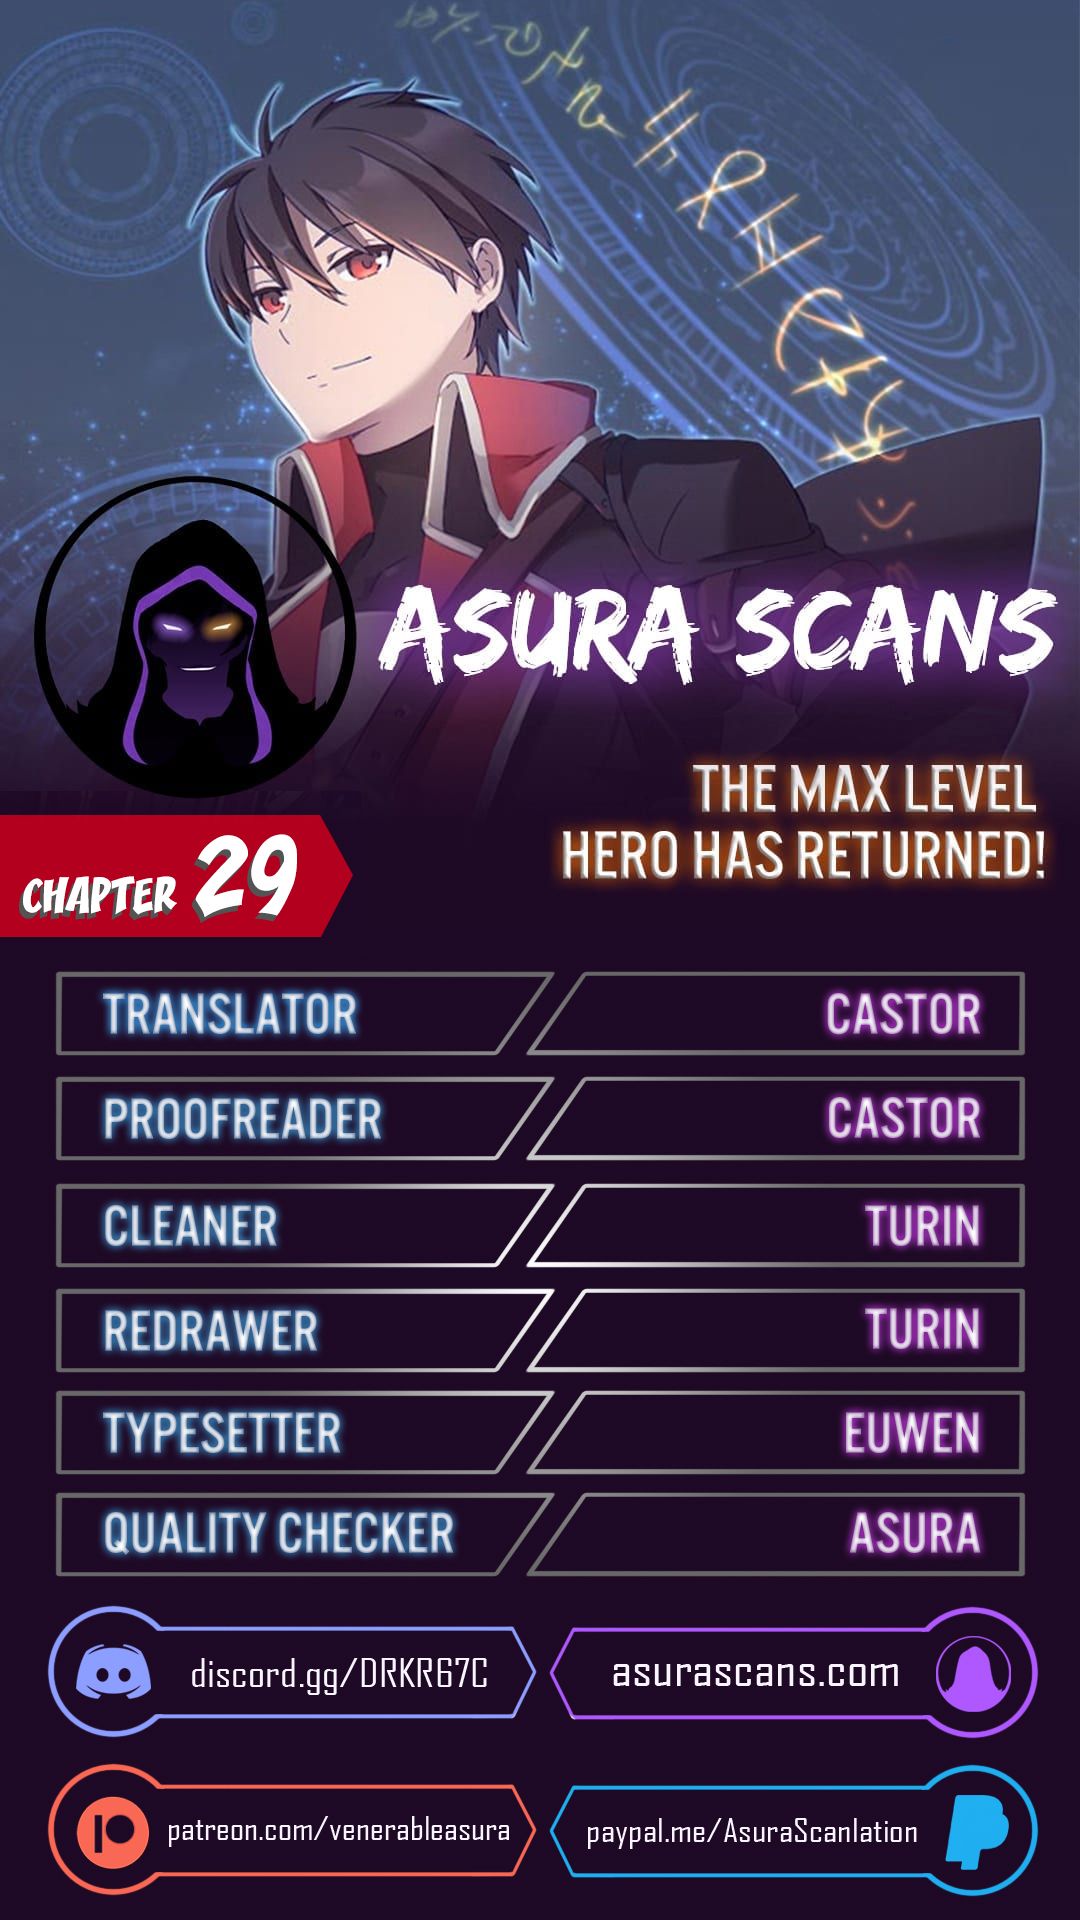 The MAX leveled hero will return! Chapter 29